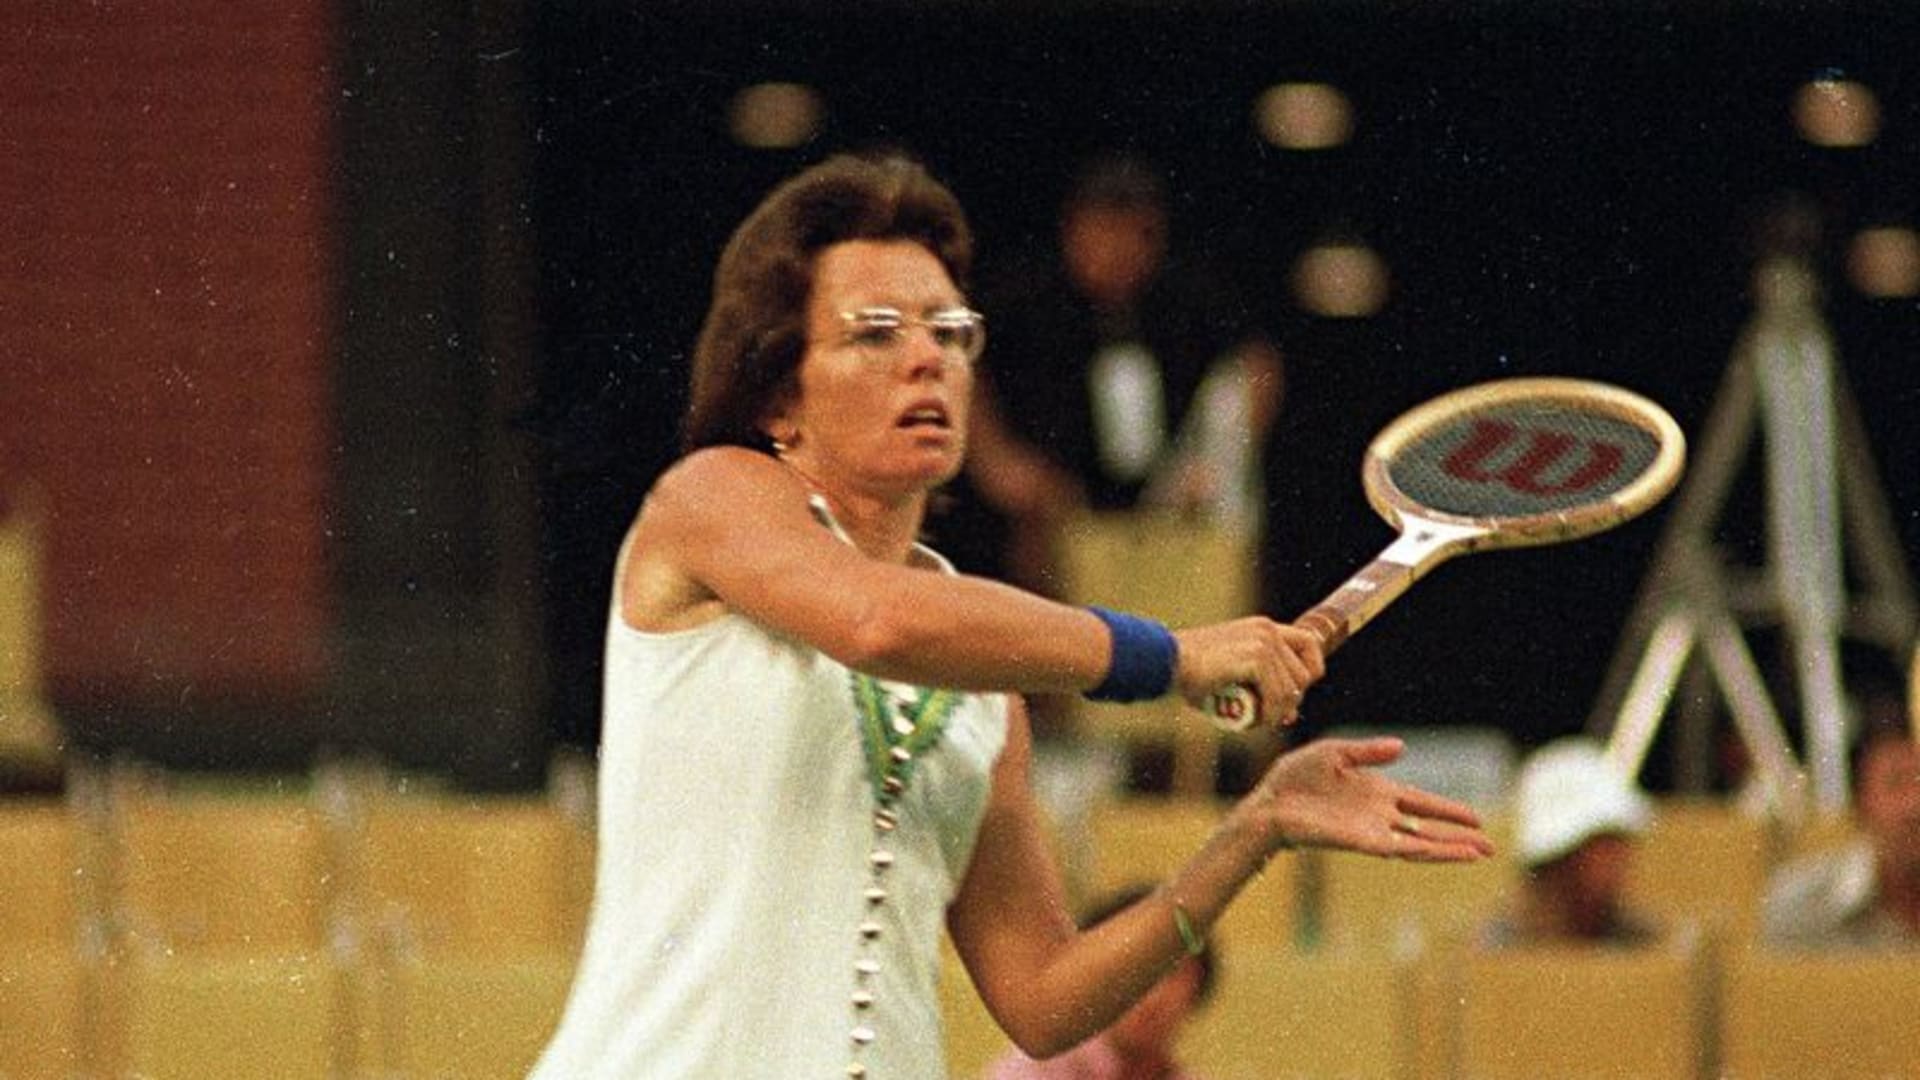 A Mighty Girl on X: #OnThisDay in 1973, @BillieJeanKing defeated Bobby  Riggs in the famous Battle of the Sexes tennis match. King would go on to  found @WomensSportsFdn, which is dedicated to